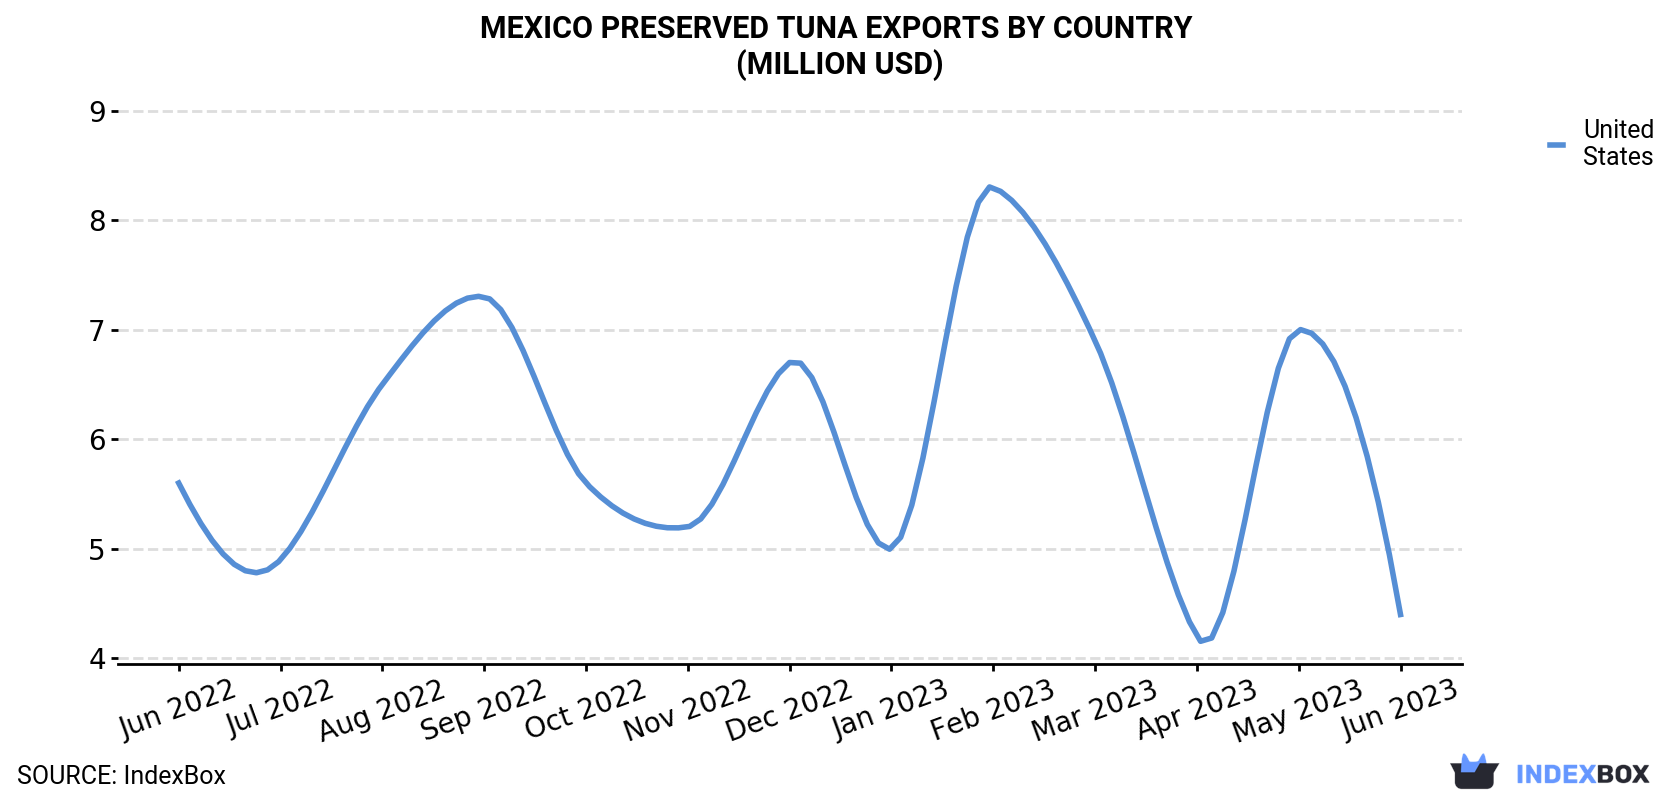 Mexico Preserved Tuna Exports By Country (Million USD)